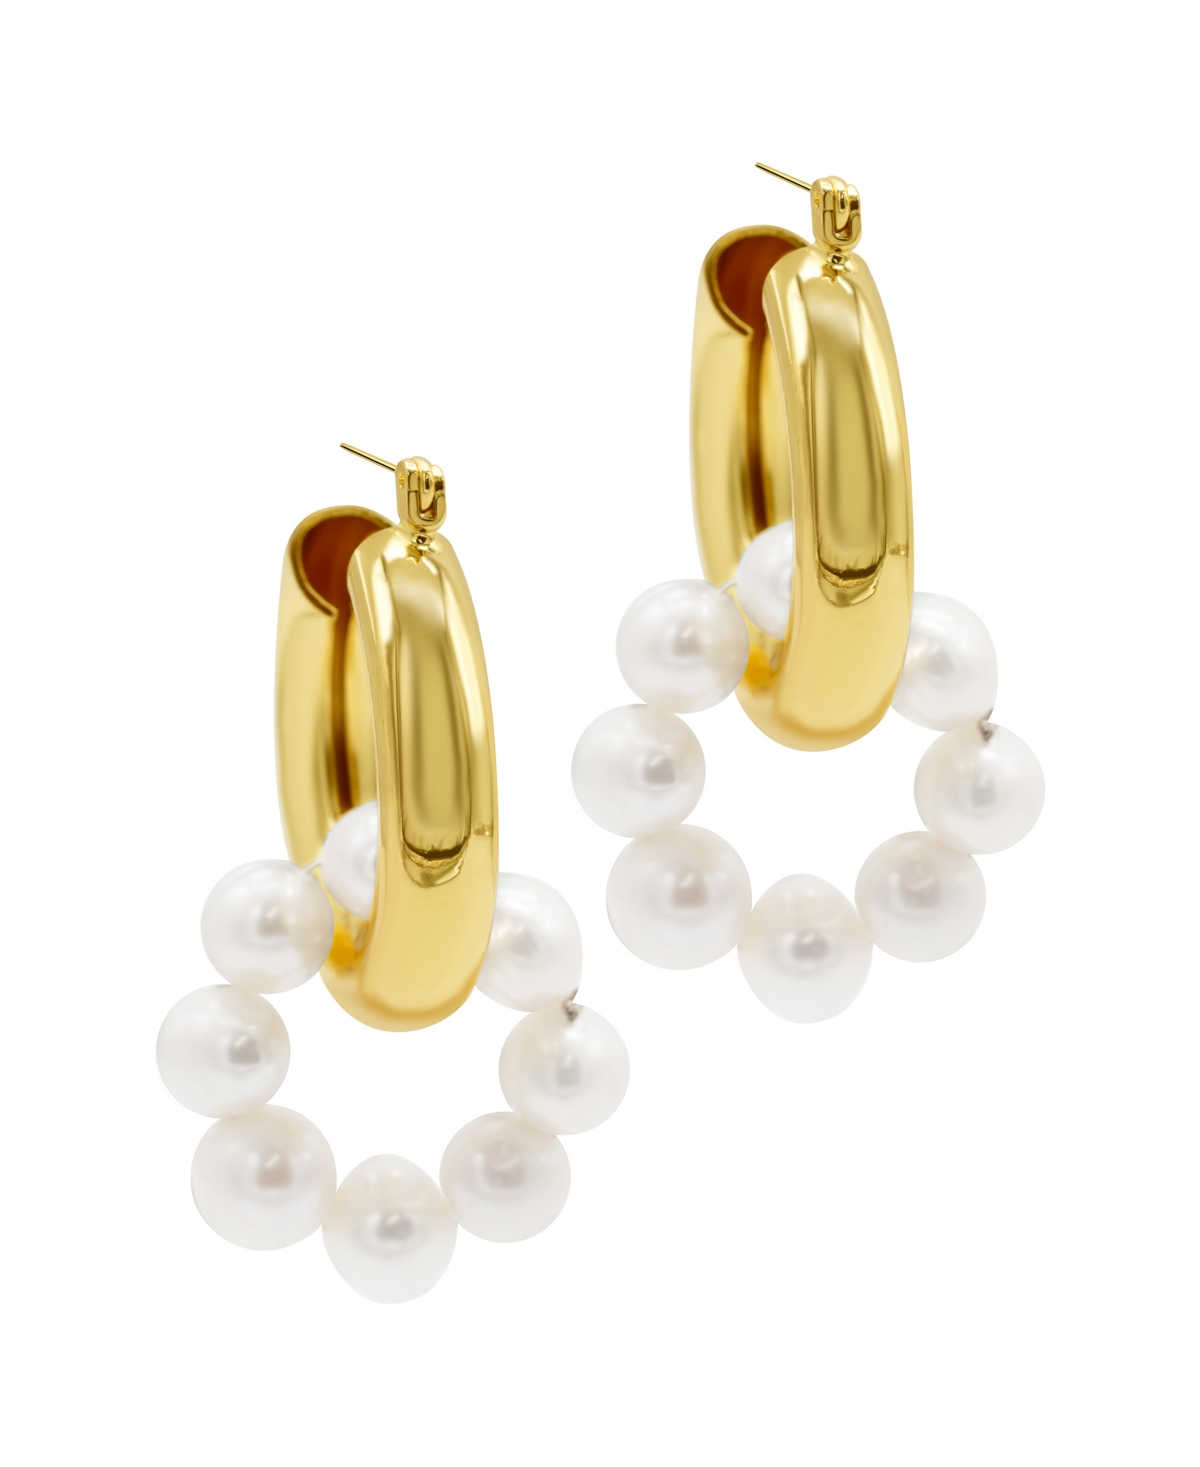 Shop Adornia 14k Gold-plated Hoop And Imitation Pearl Drop And Dangle Earrings In White